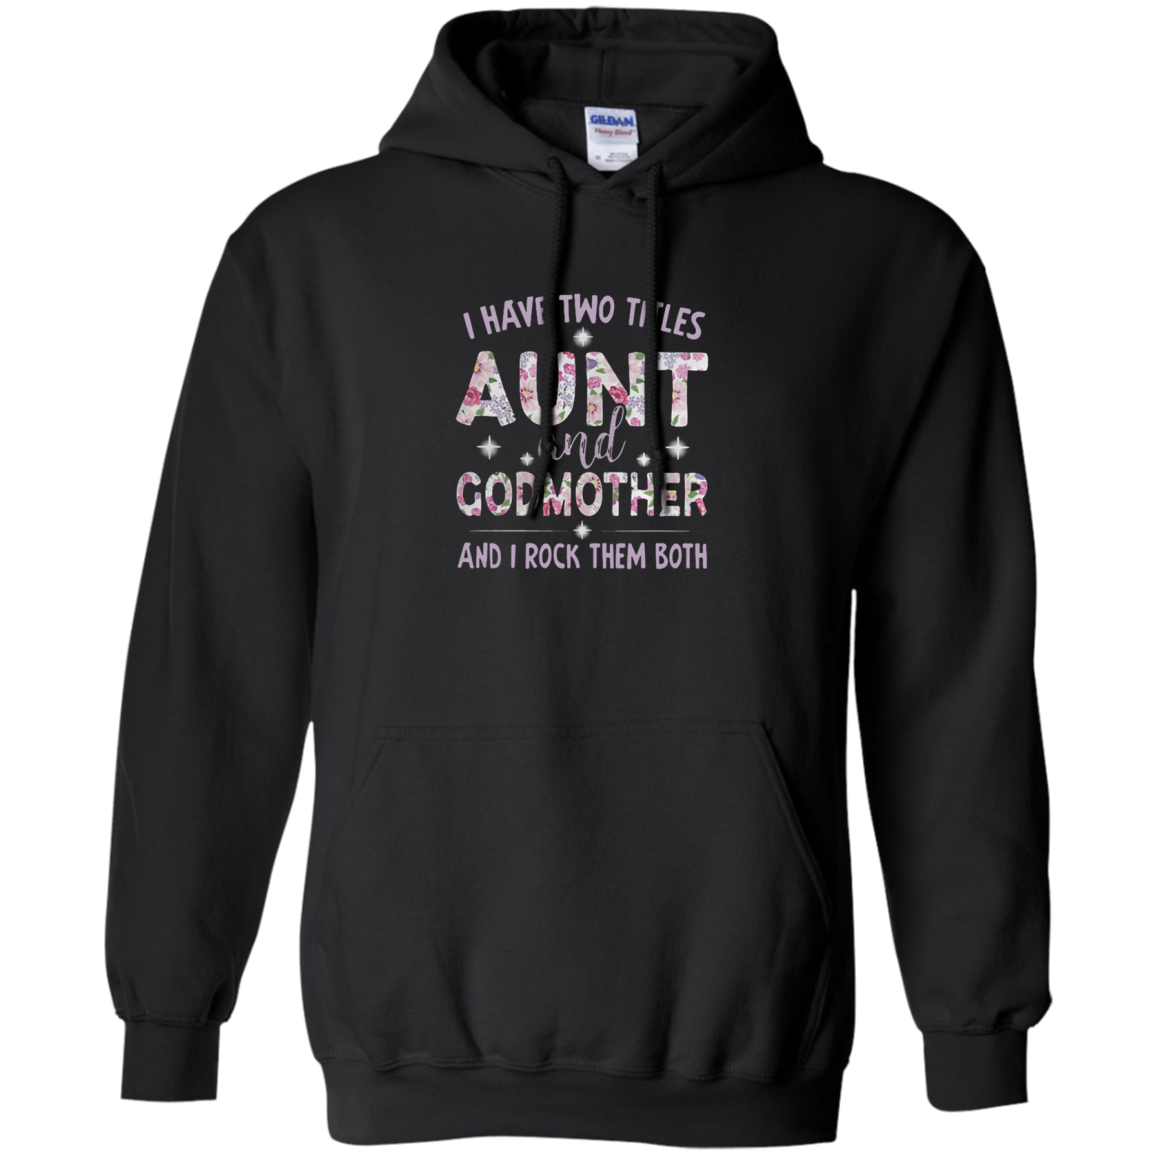 Get Here I Have Two Titles Aunt And Godmother And I Rock Them Both - Tula Store Shirts